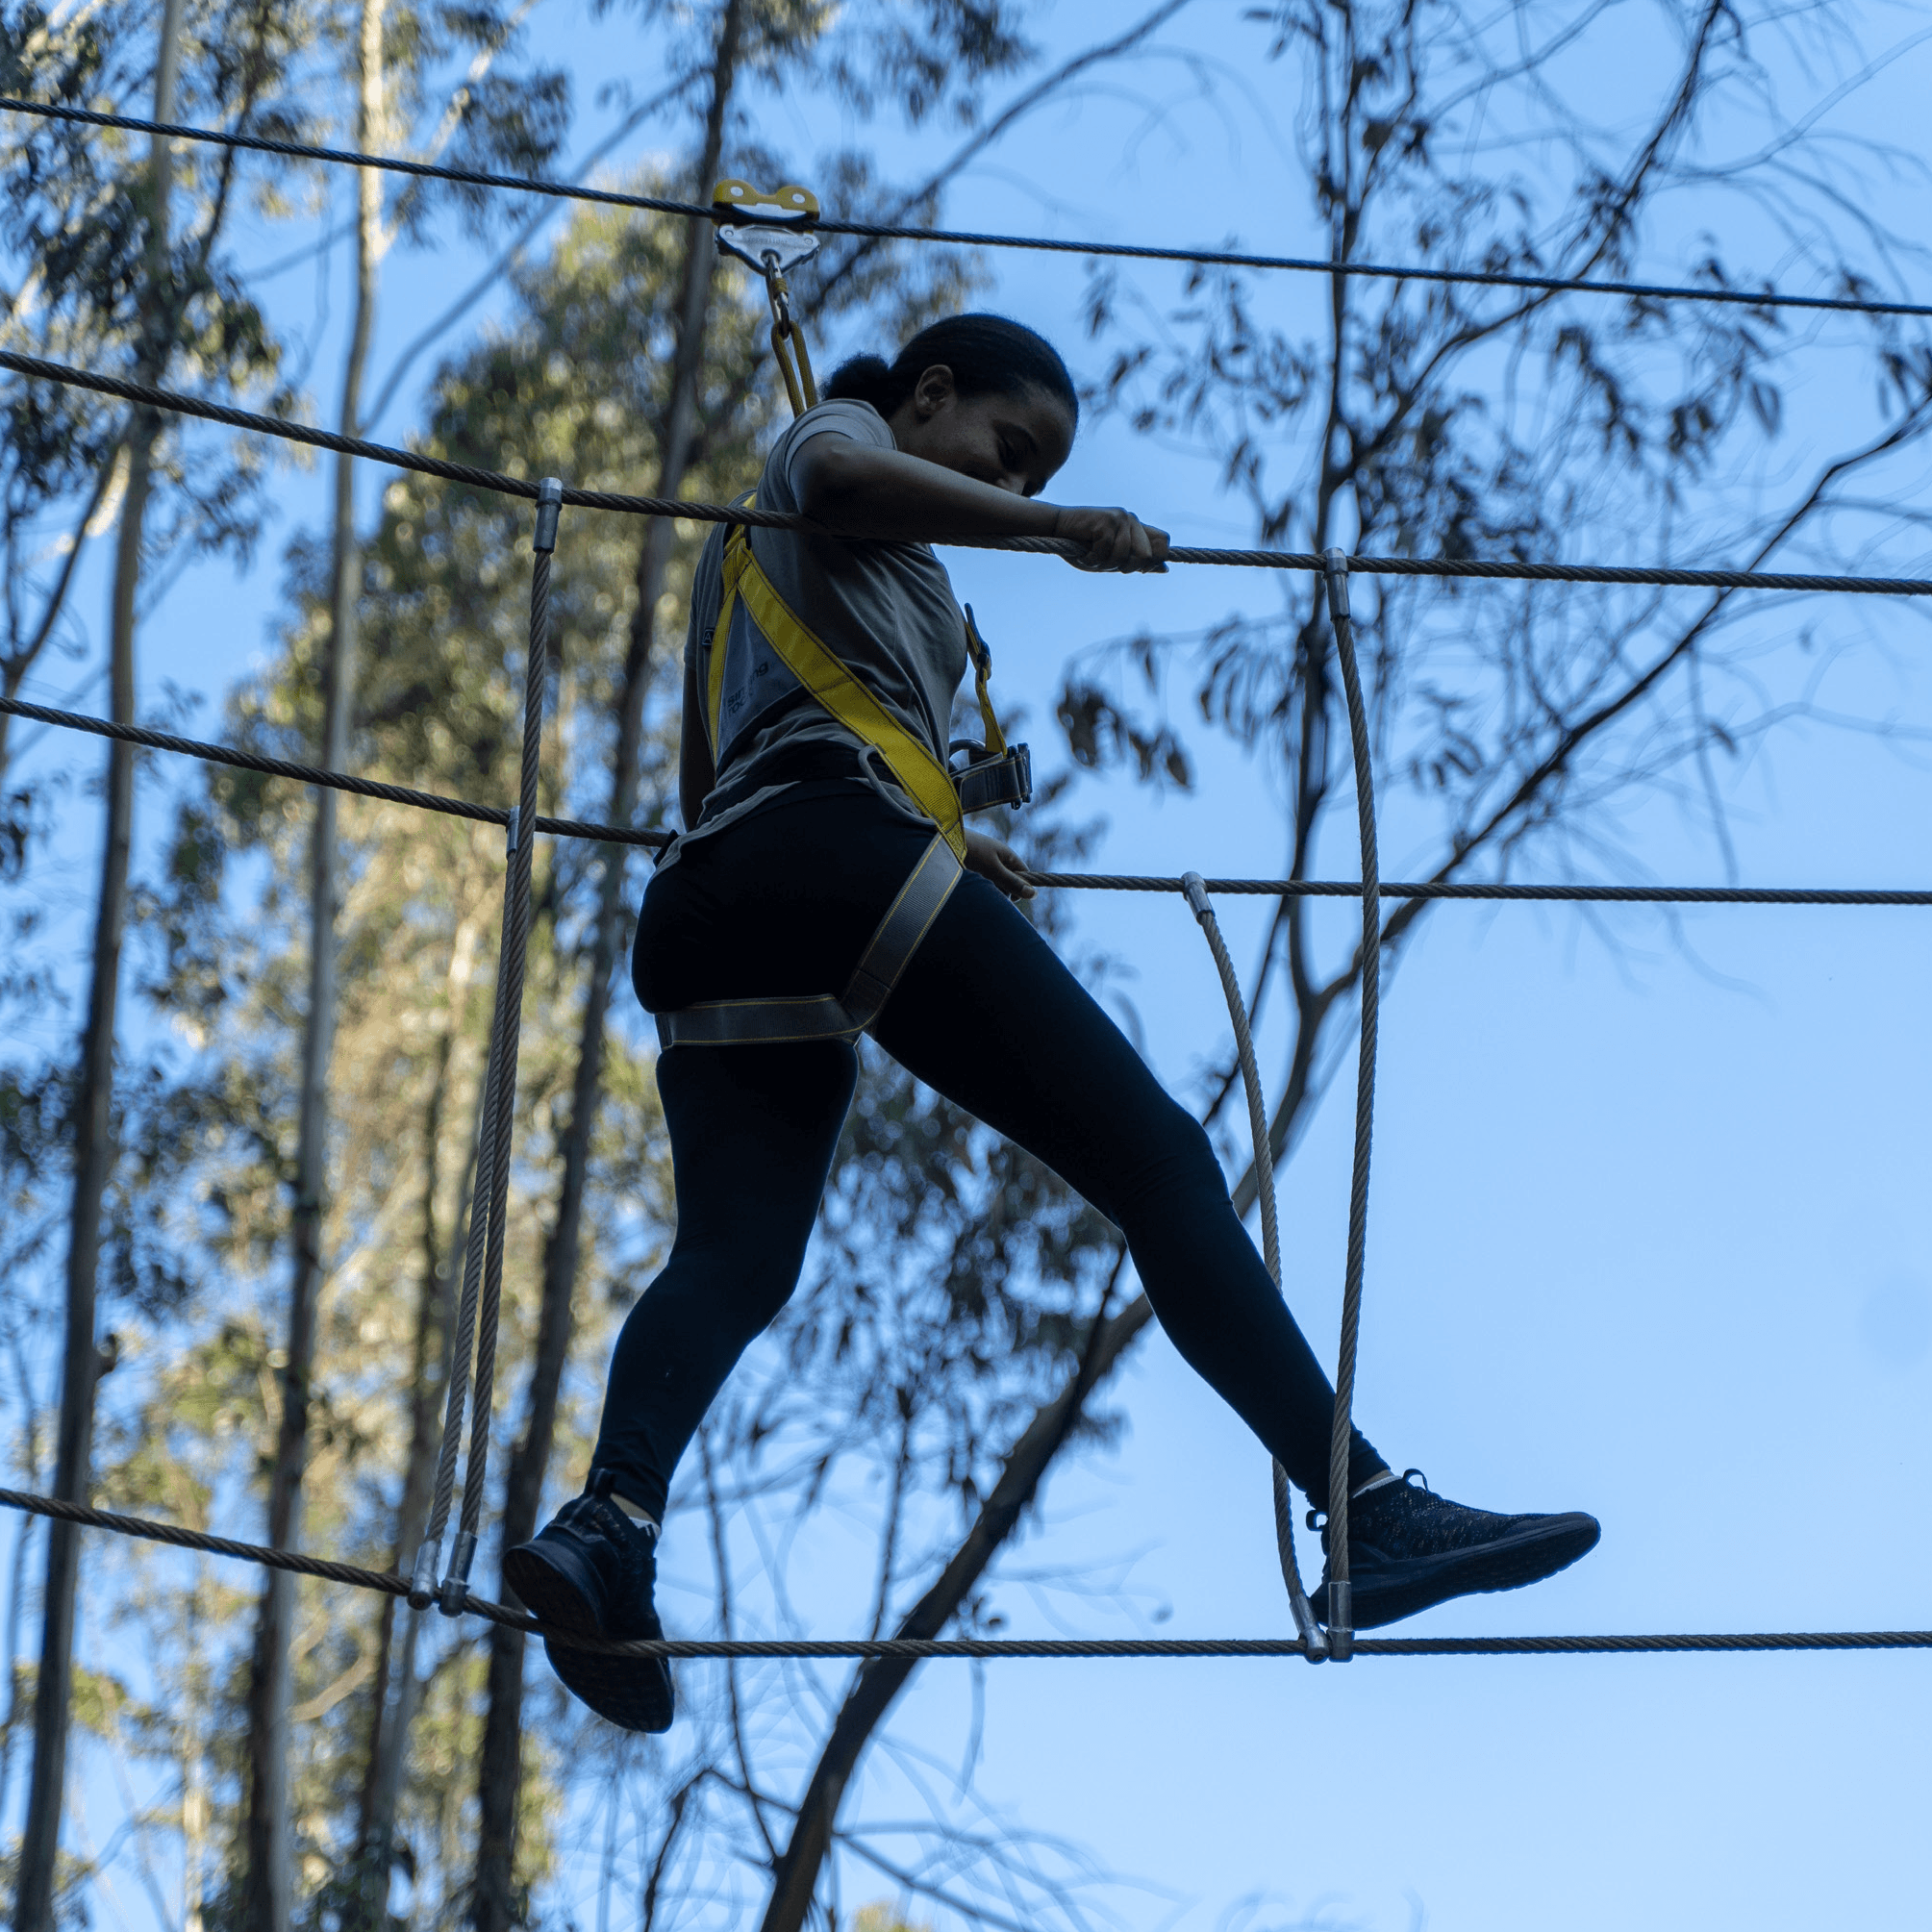 ROPE COURSE